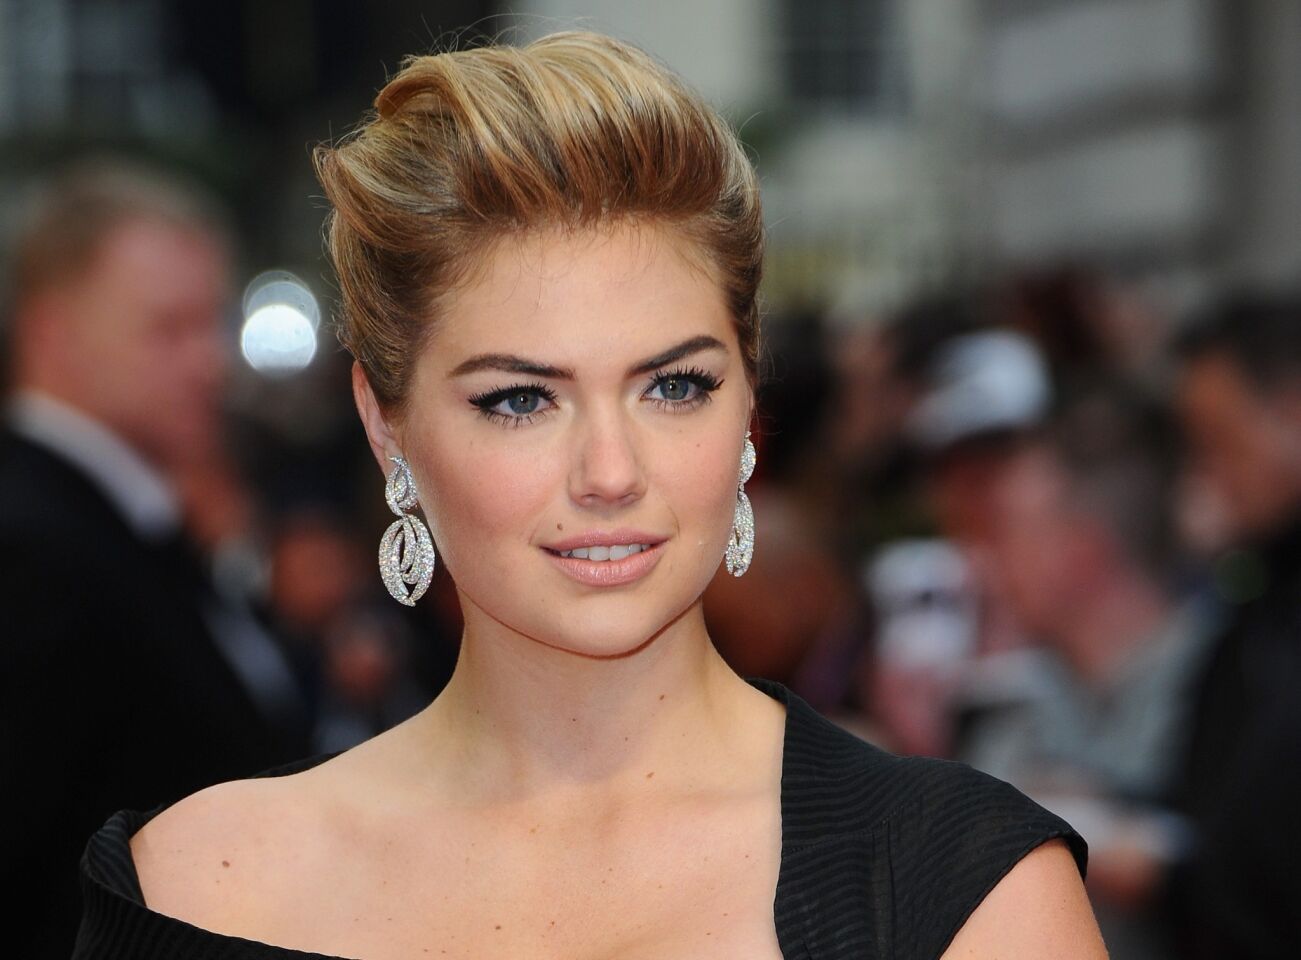 Kate Upton attends the London premiere of her comedy "The Other Woman" on Wednesday, wearing Adler earrings.